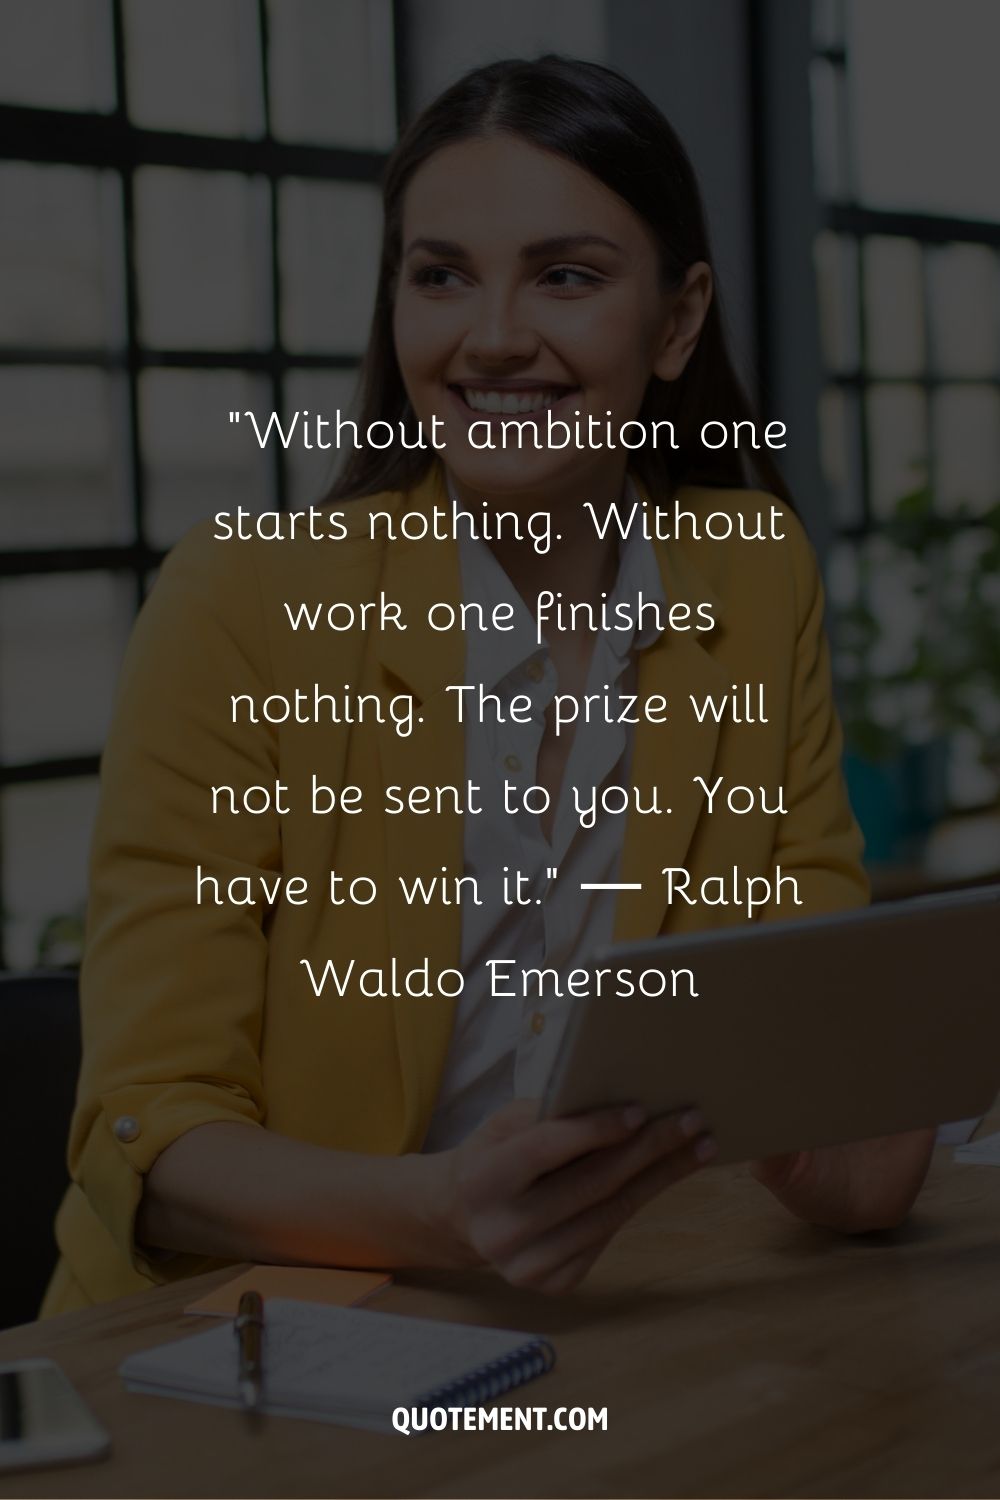 “Without ambition one starts nothing. Without work one finishes nothing. The prize will not be sent to you. You have to win it.” ― Ralph Waldo Emerson